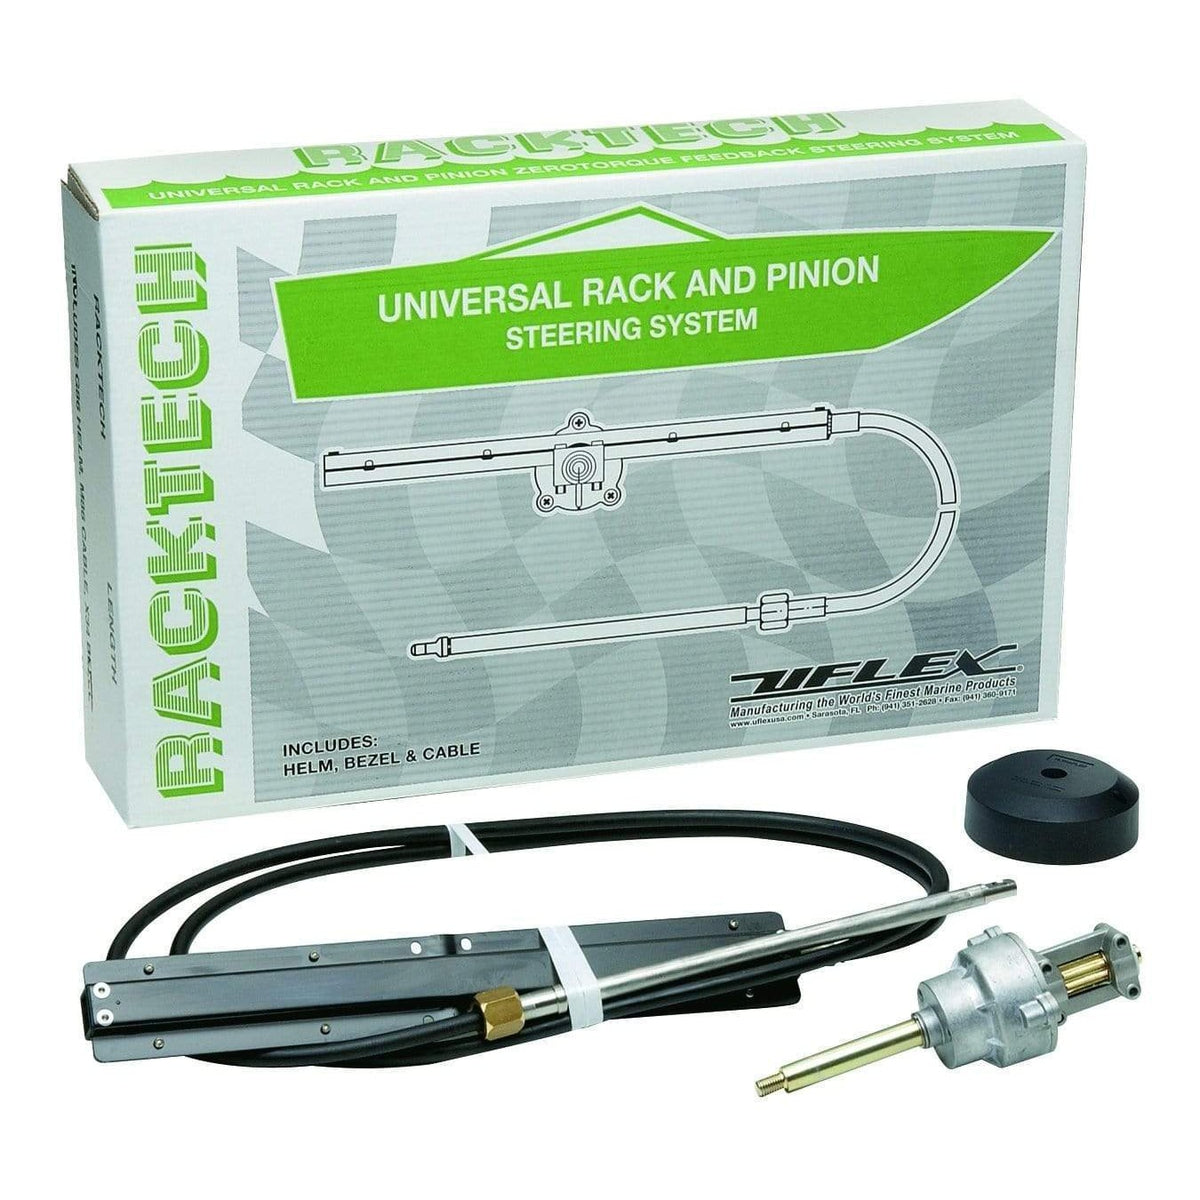 Uflex USA Qualifies for Free Shipping Uflex Rack and Pinion Steering Kit with 9' Cable #RACKTECH09